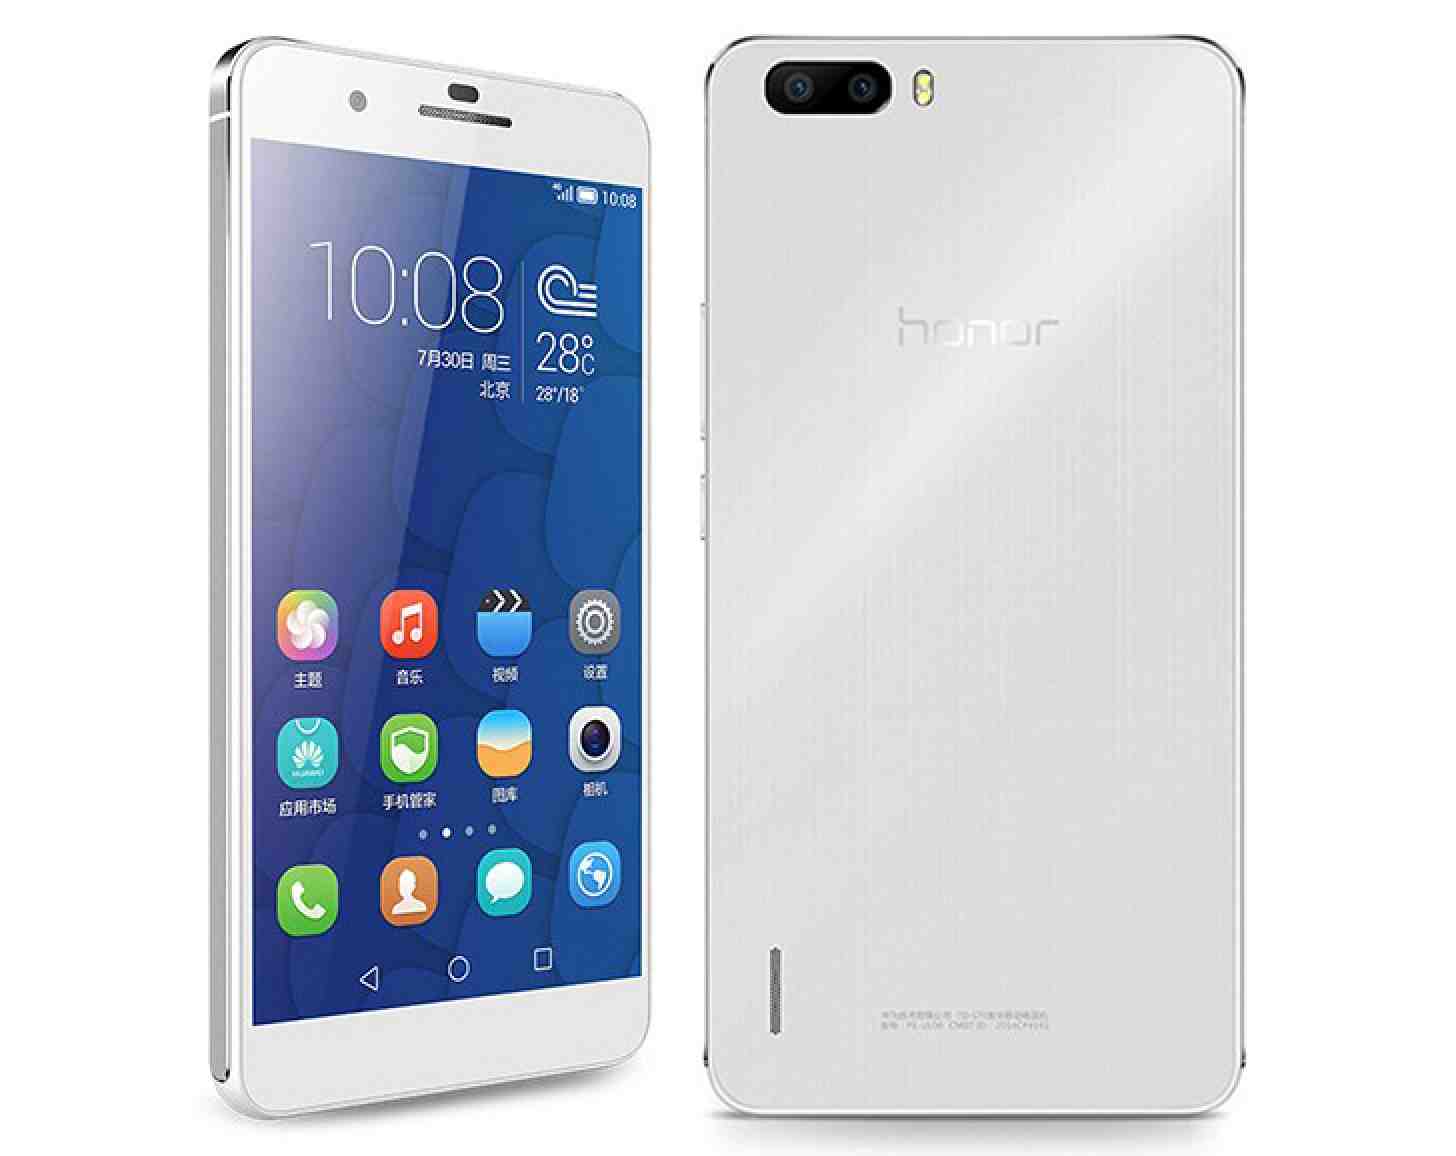 Huawei Honor 6 Plus specs, review, release - PhonesData